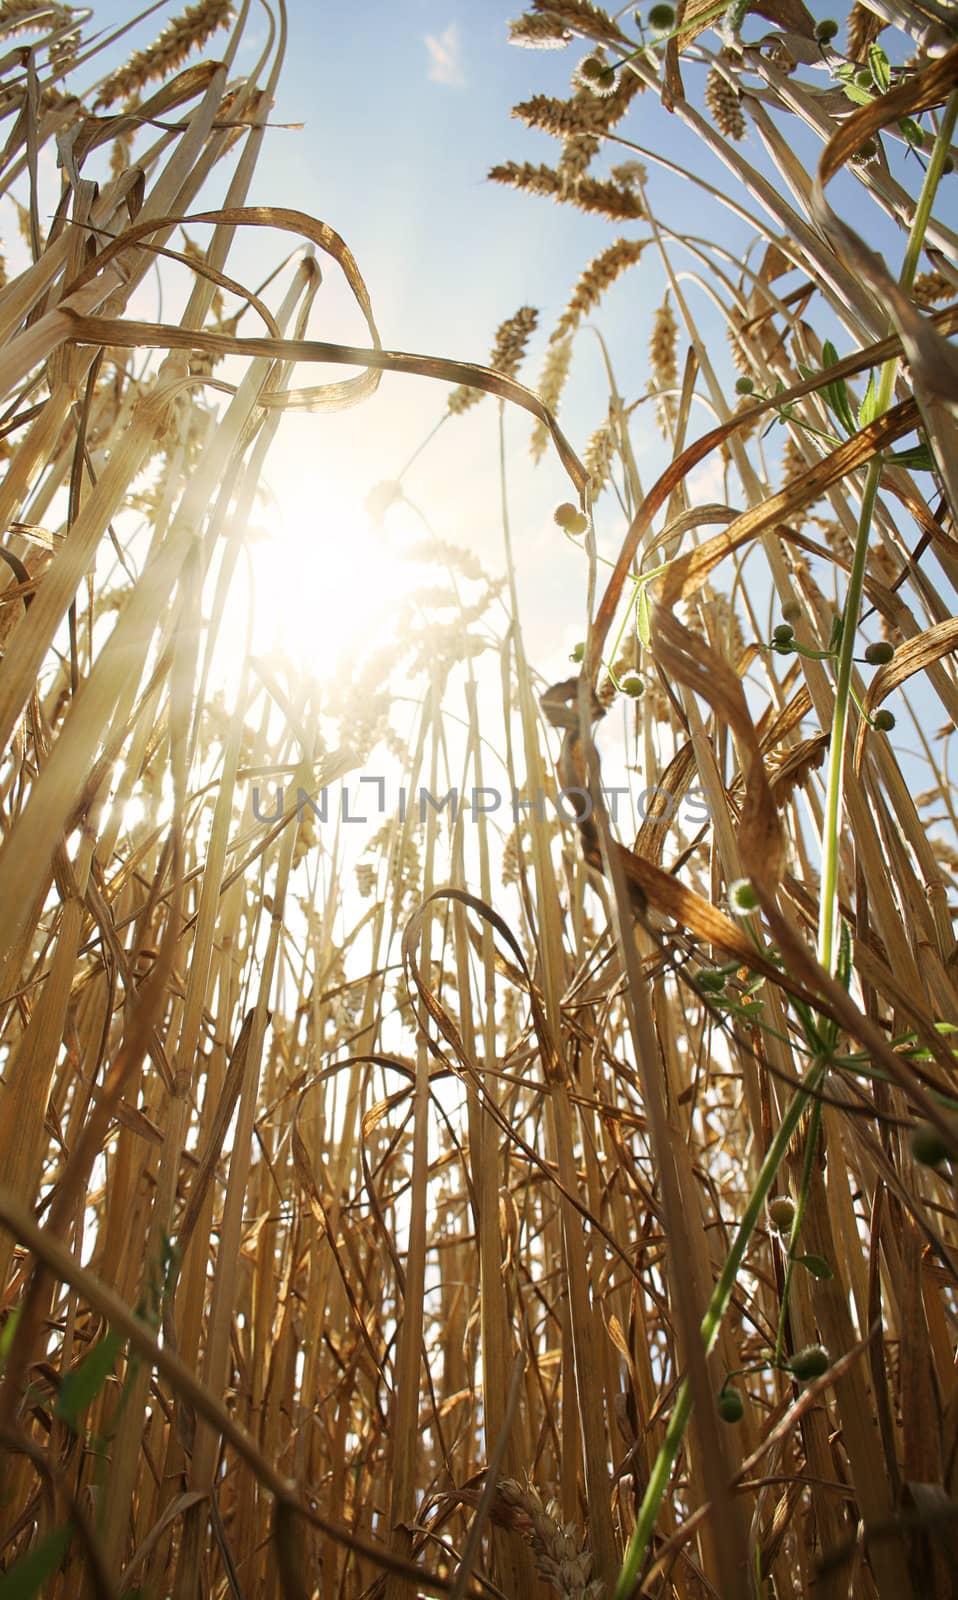 inside the wheat field with a sunny sky